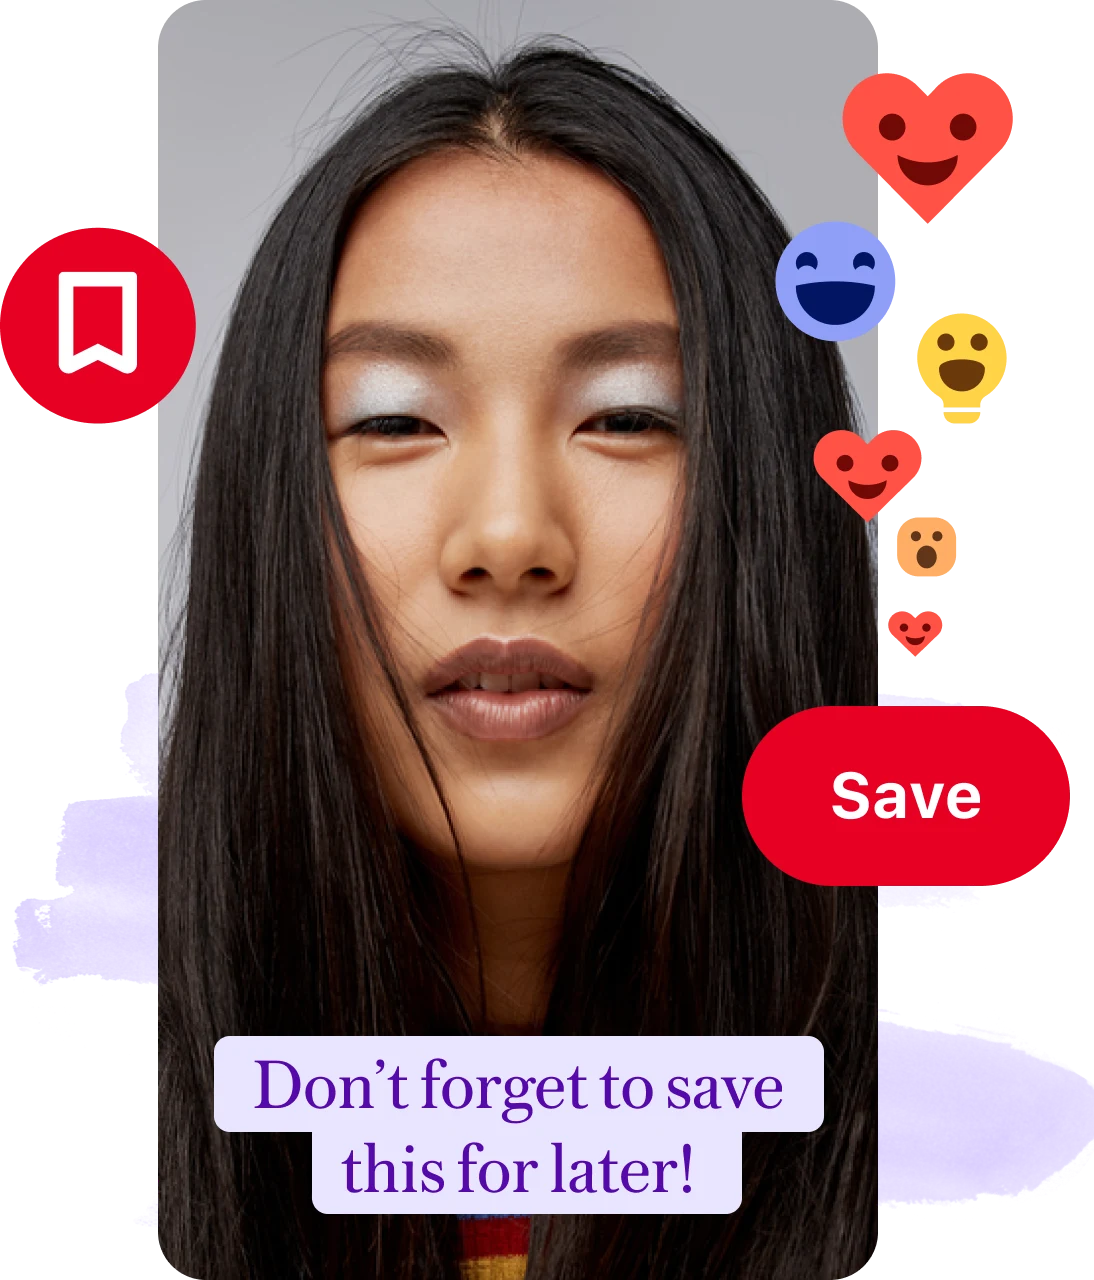 Pin of a woman's face with the reminder to save label, save buttons and emoji reactions